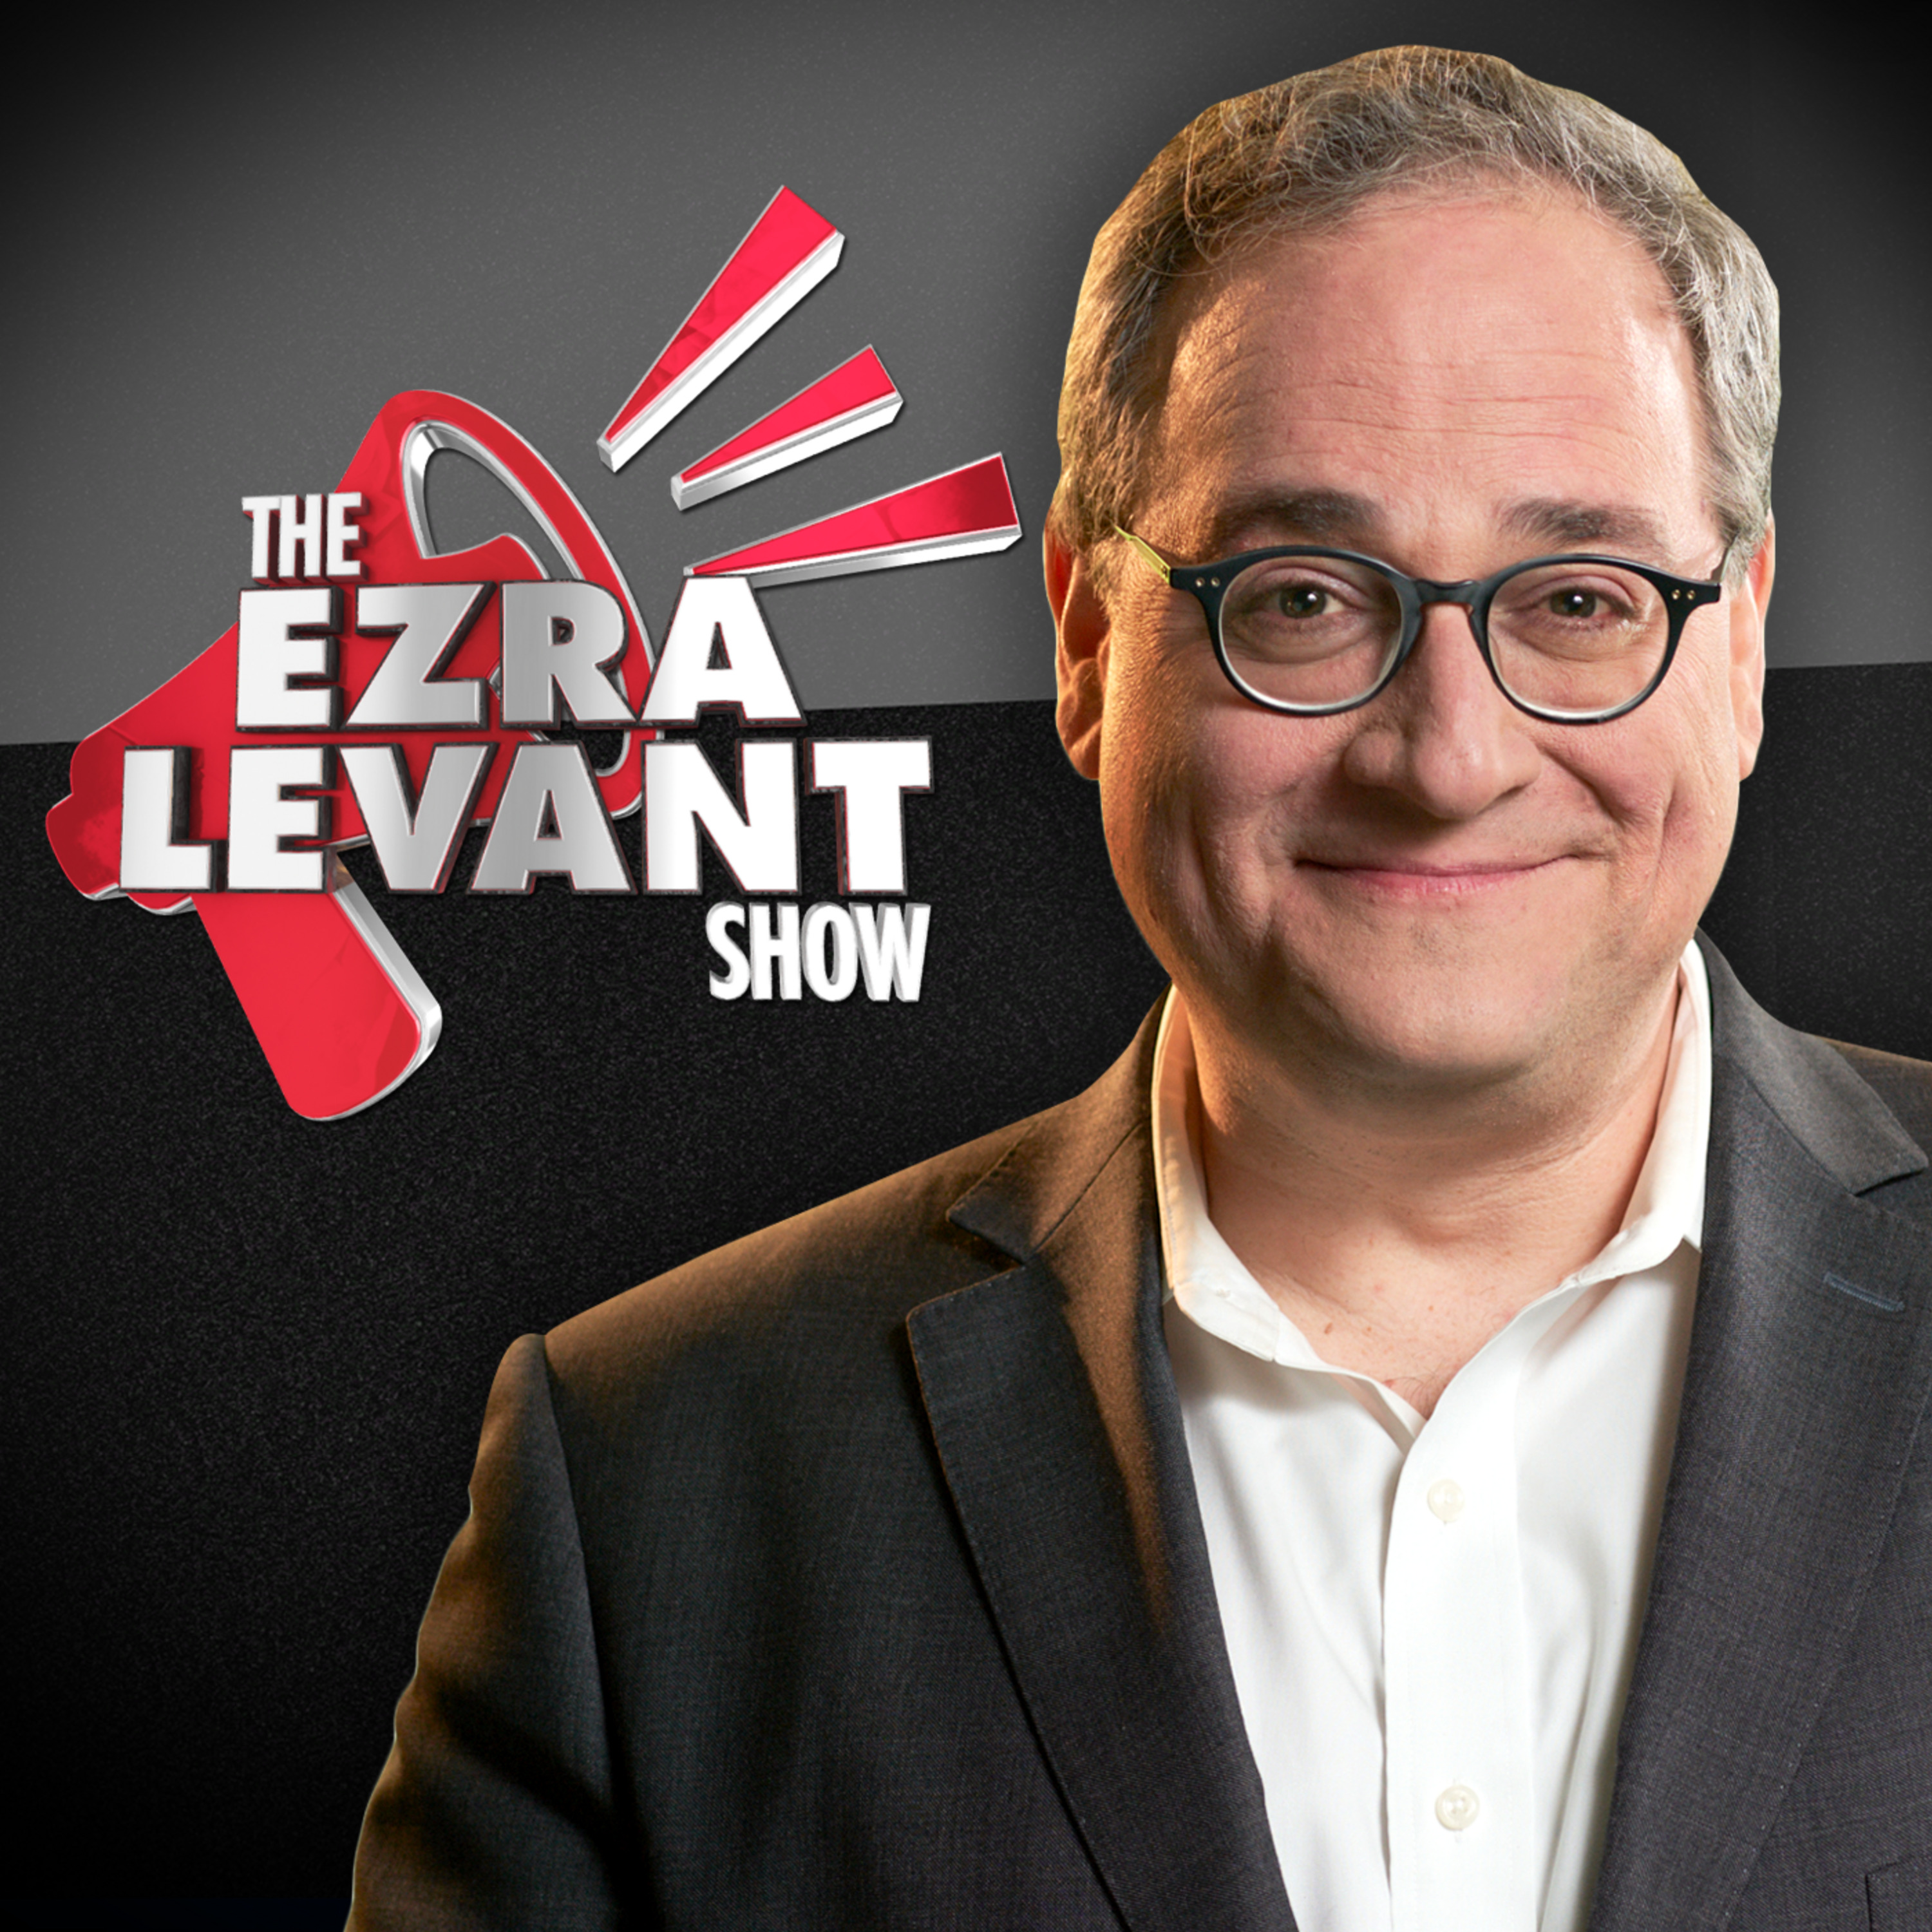 EZRA LEVANT | Now Justin Trudeau wants to control censorship through Artificial Intelligence